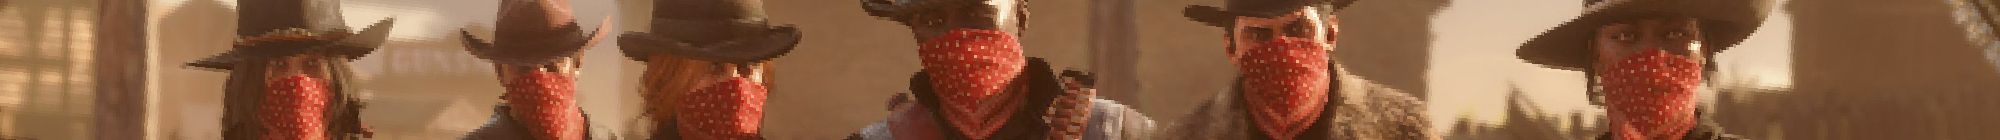 Red Dead Online Divider 6 - a row of gang members in bandanas with only their faces visible